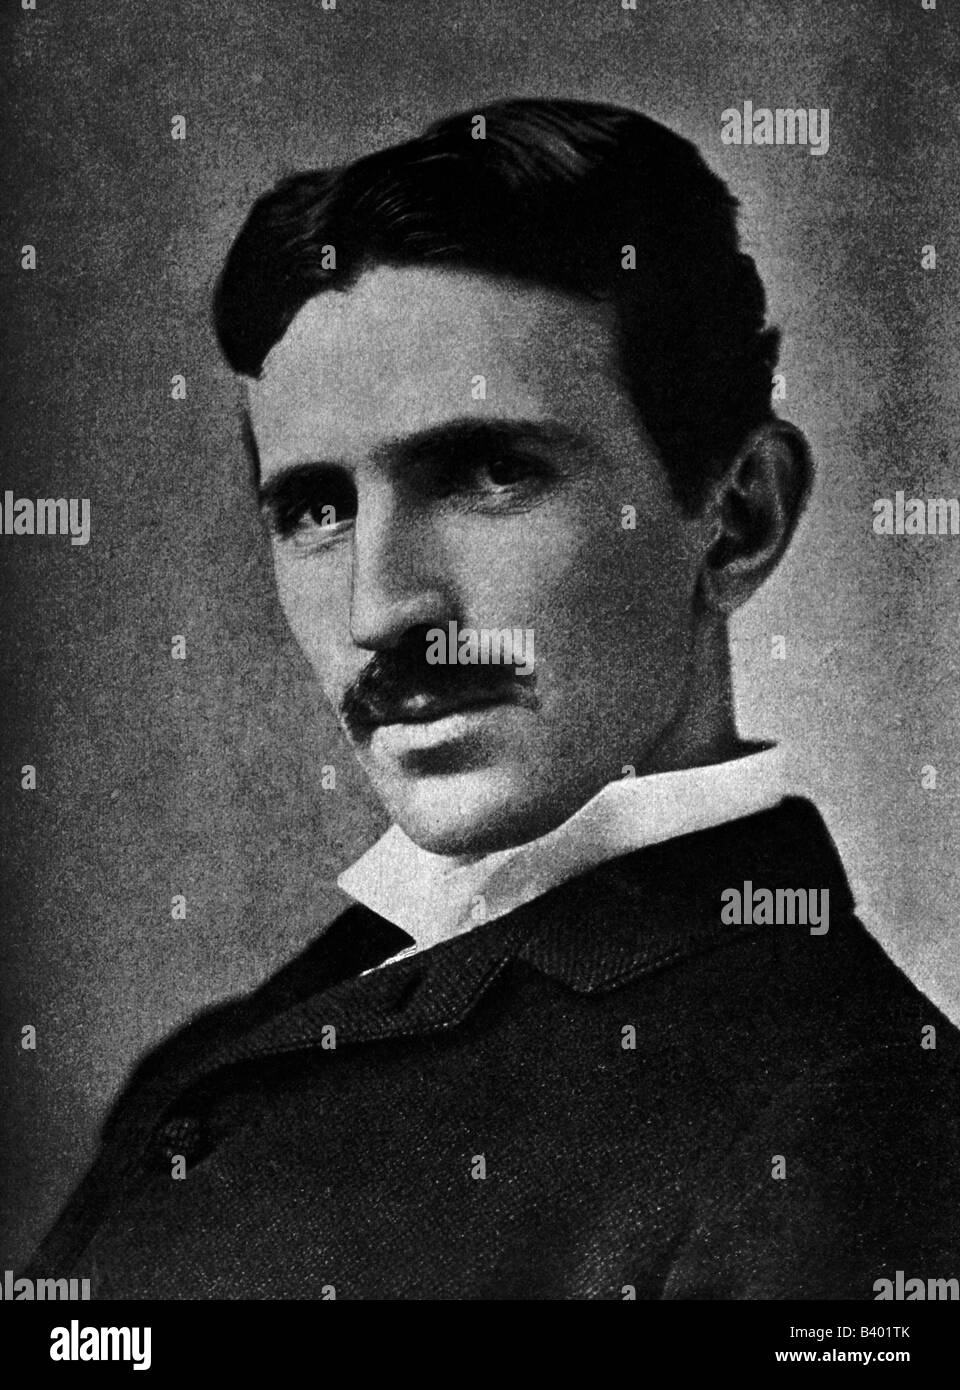 Tesla, Nicola 10.7.1856 - 18.1.1943, American scientist (physicist), mechanical engineer, electrical engineer, portrait, ca. 1902, 19th century,  science, physics, electricity, , Stock Photo